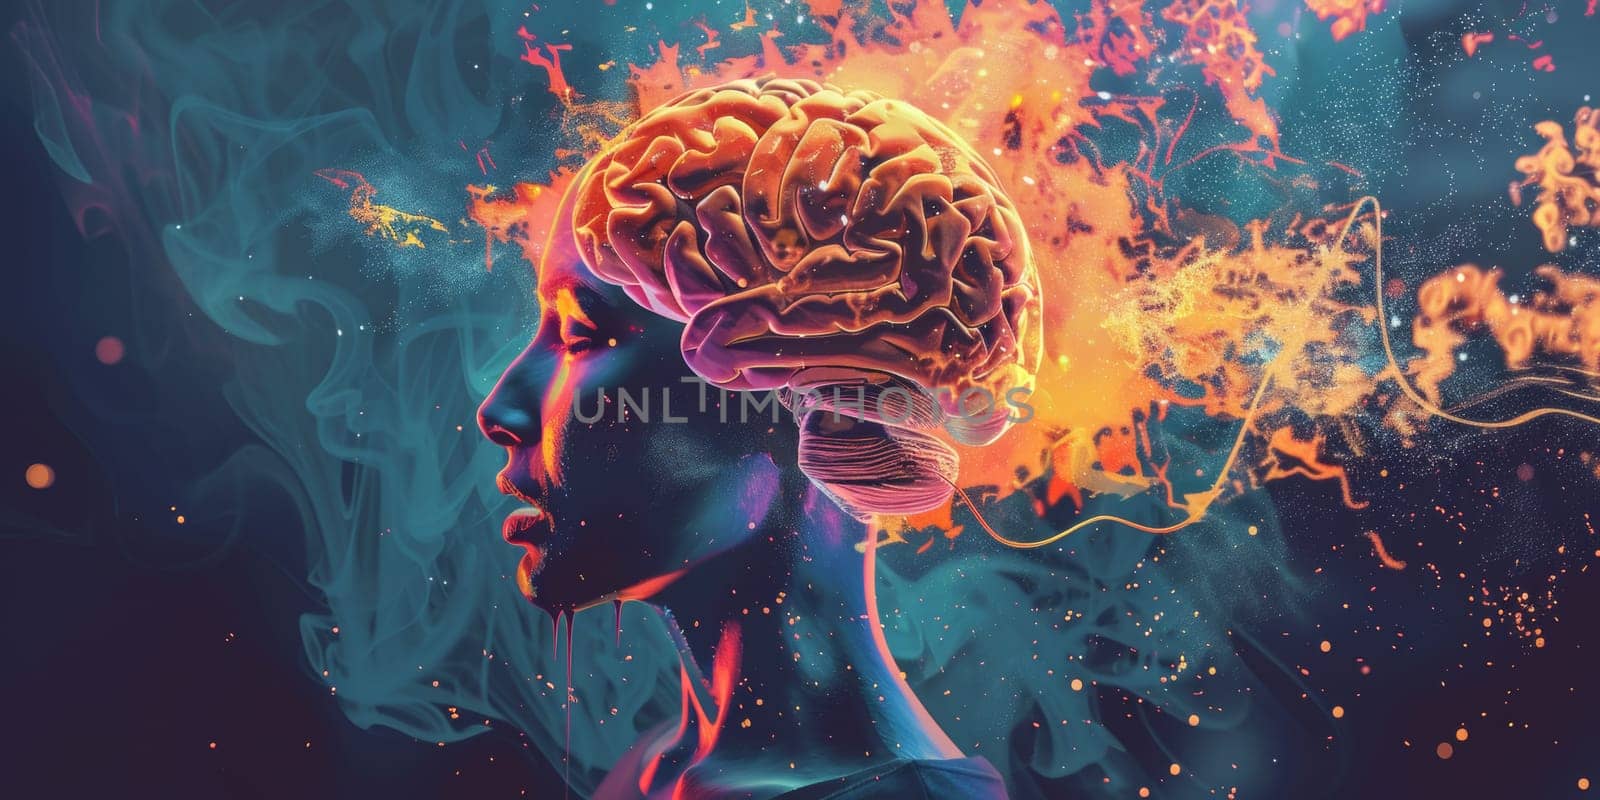 Burnout and overload of stress, flame explode out of head and brain